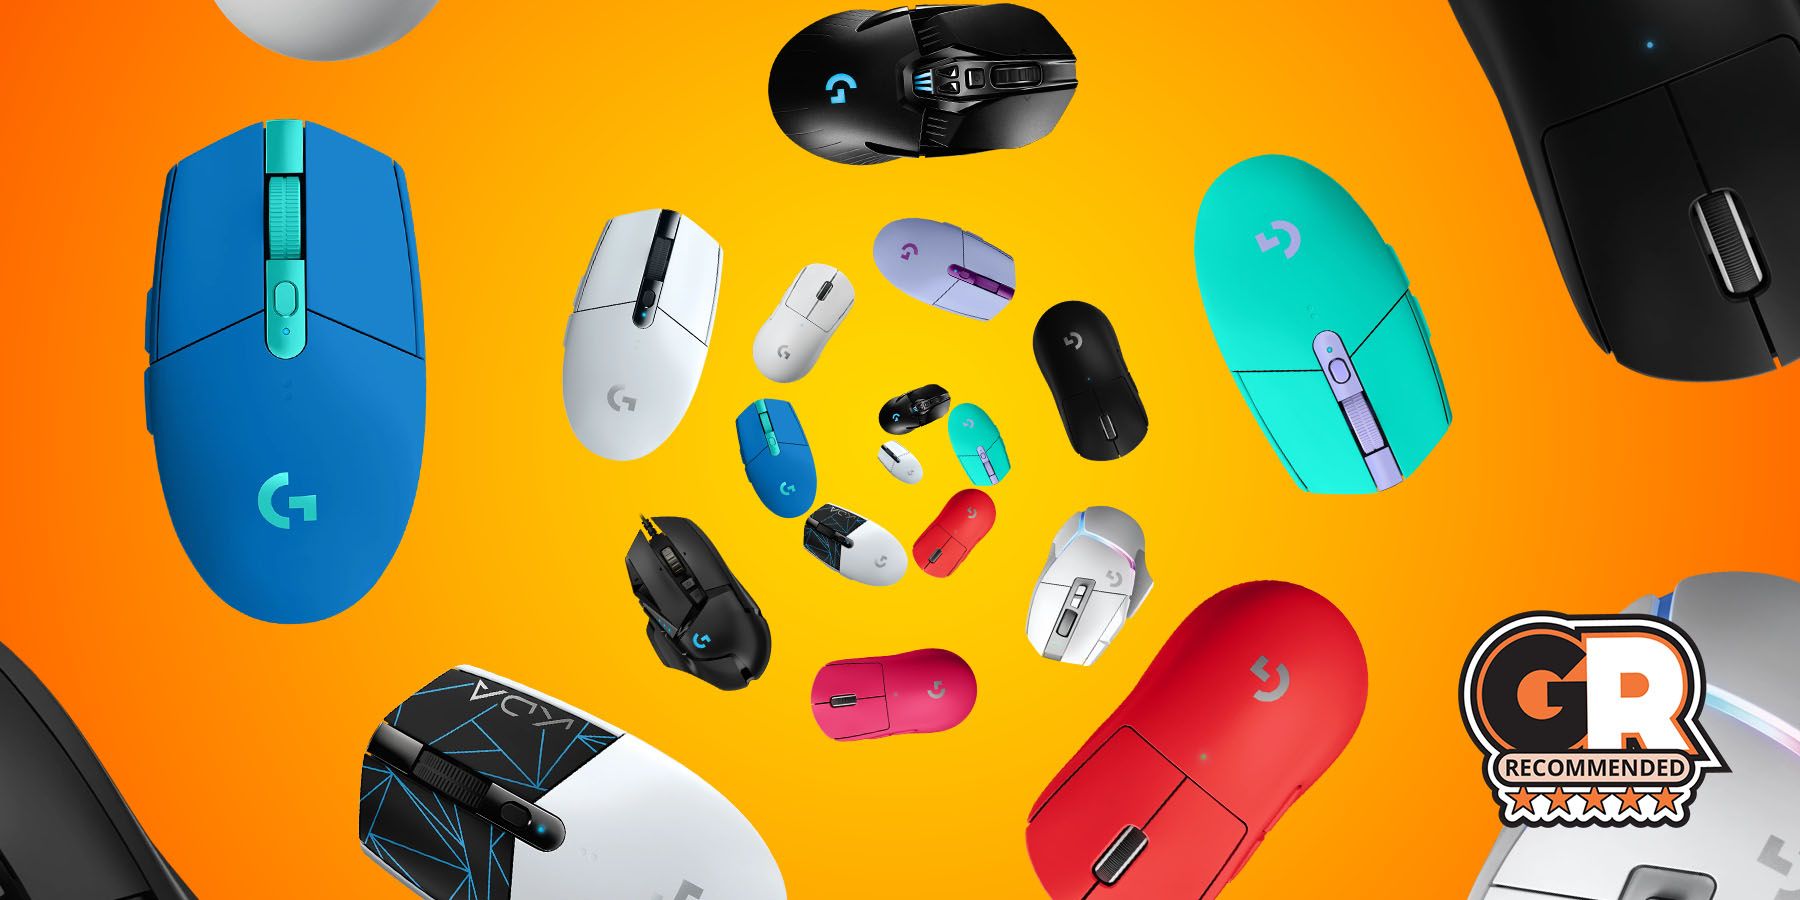 https://static0.gamerantimages.com/wordpress/wp-content/uploads/2022/11/logitech-mouse-buying-guide-feature2-1.jpg